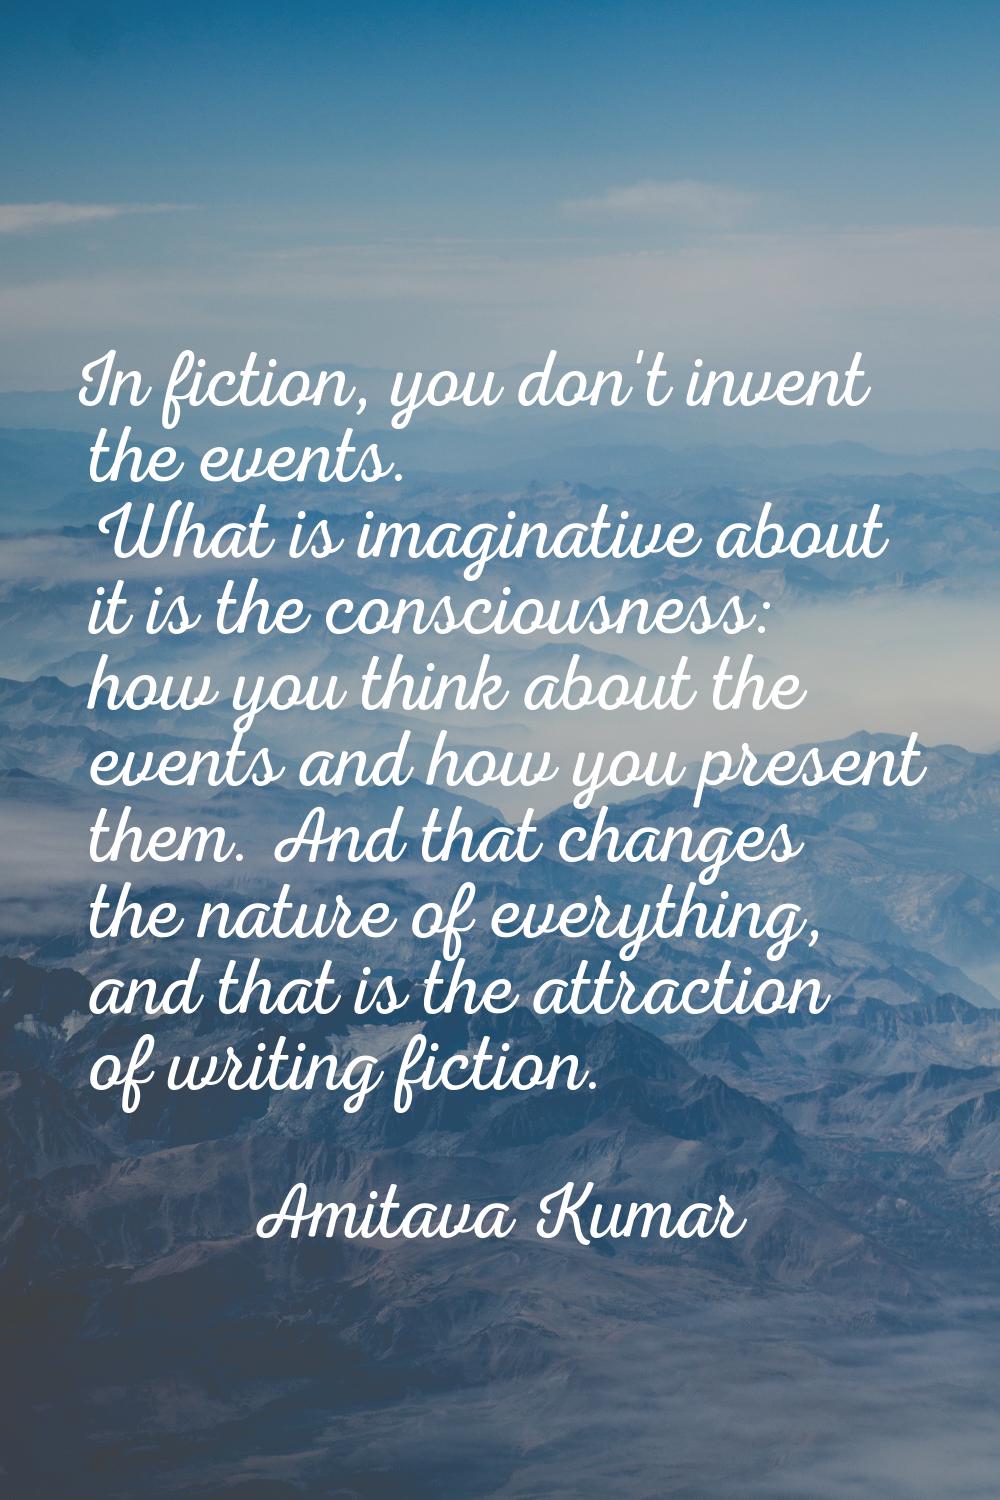 In fiction, you don't invent the events. What is imaginative about it is the consciousness: how you